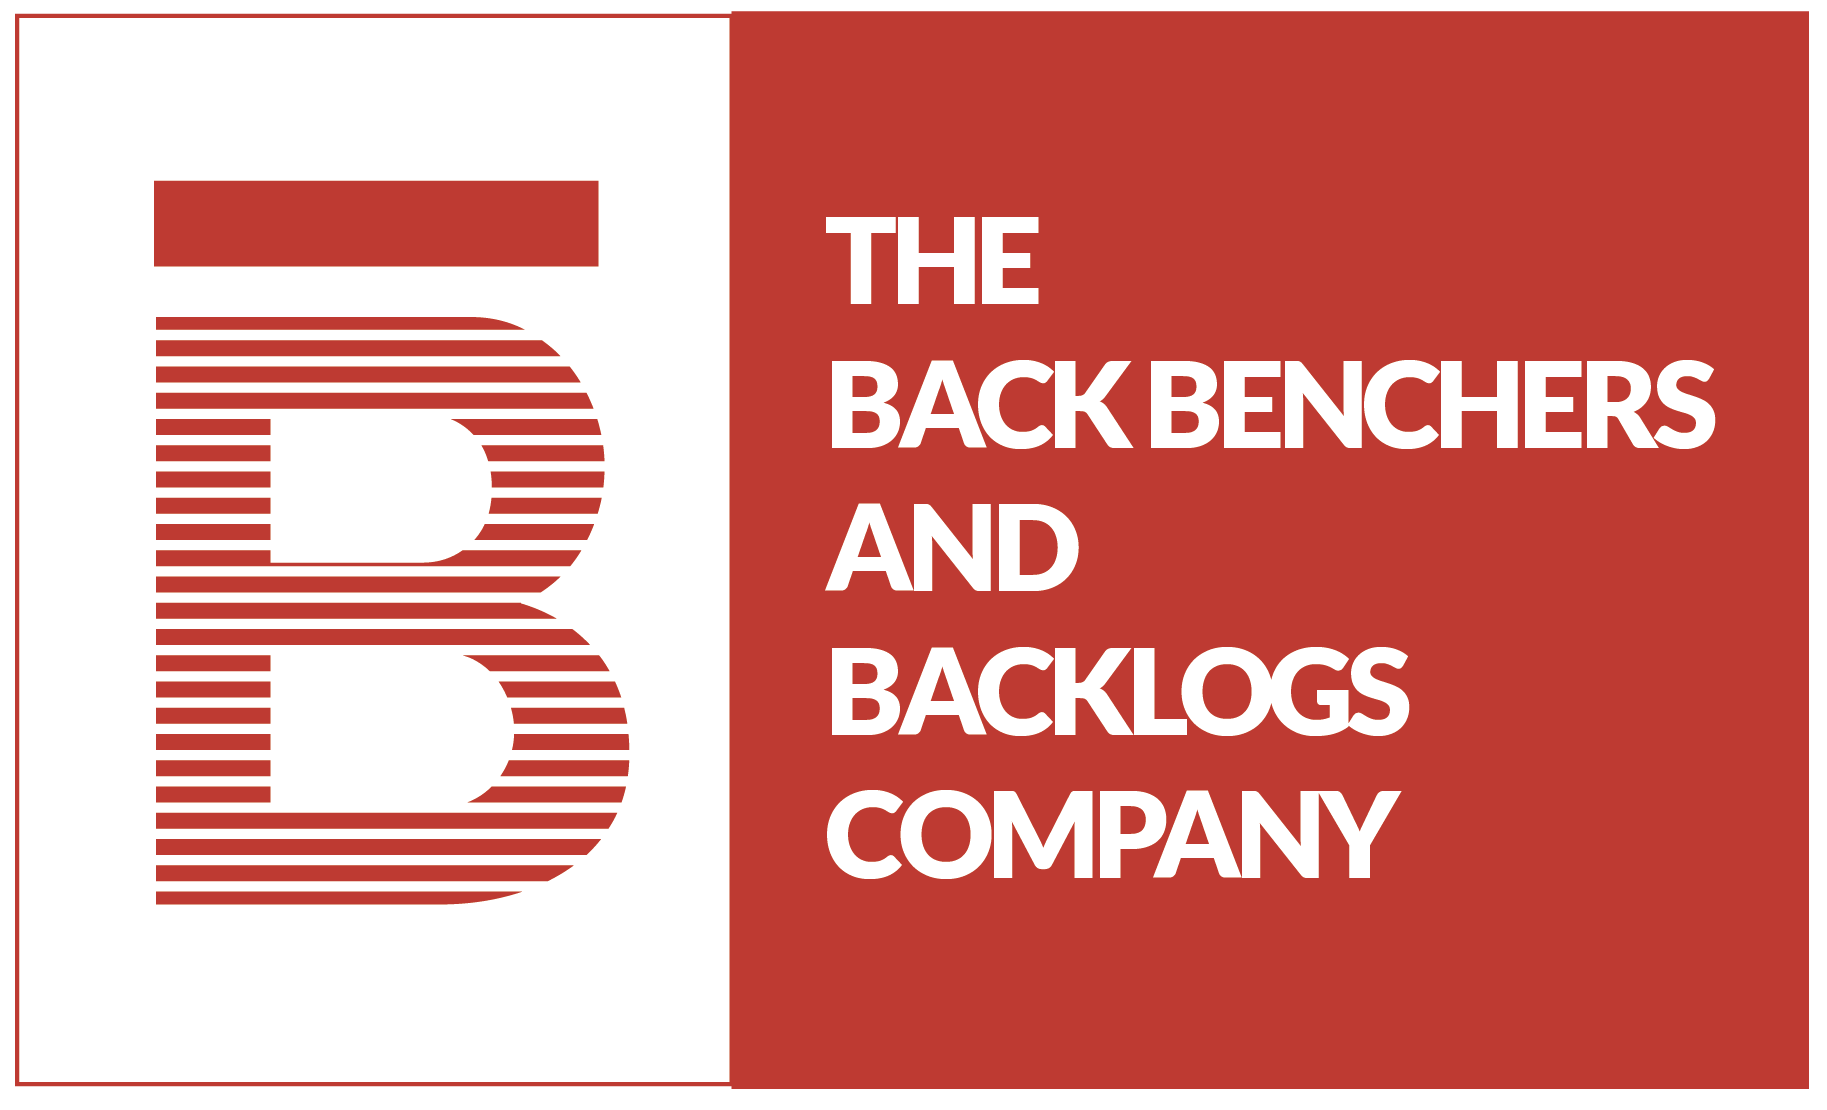 The Back Benchers And Backlogs Company